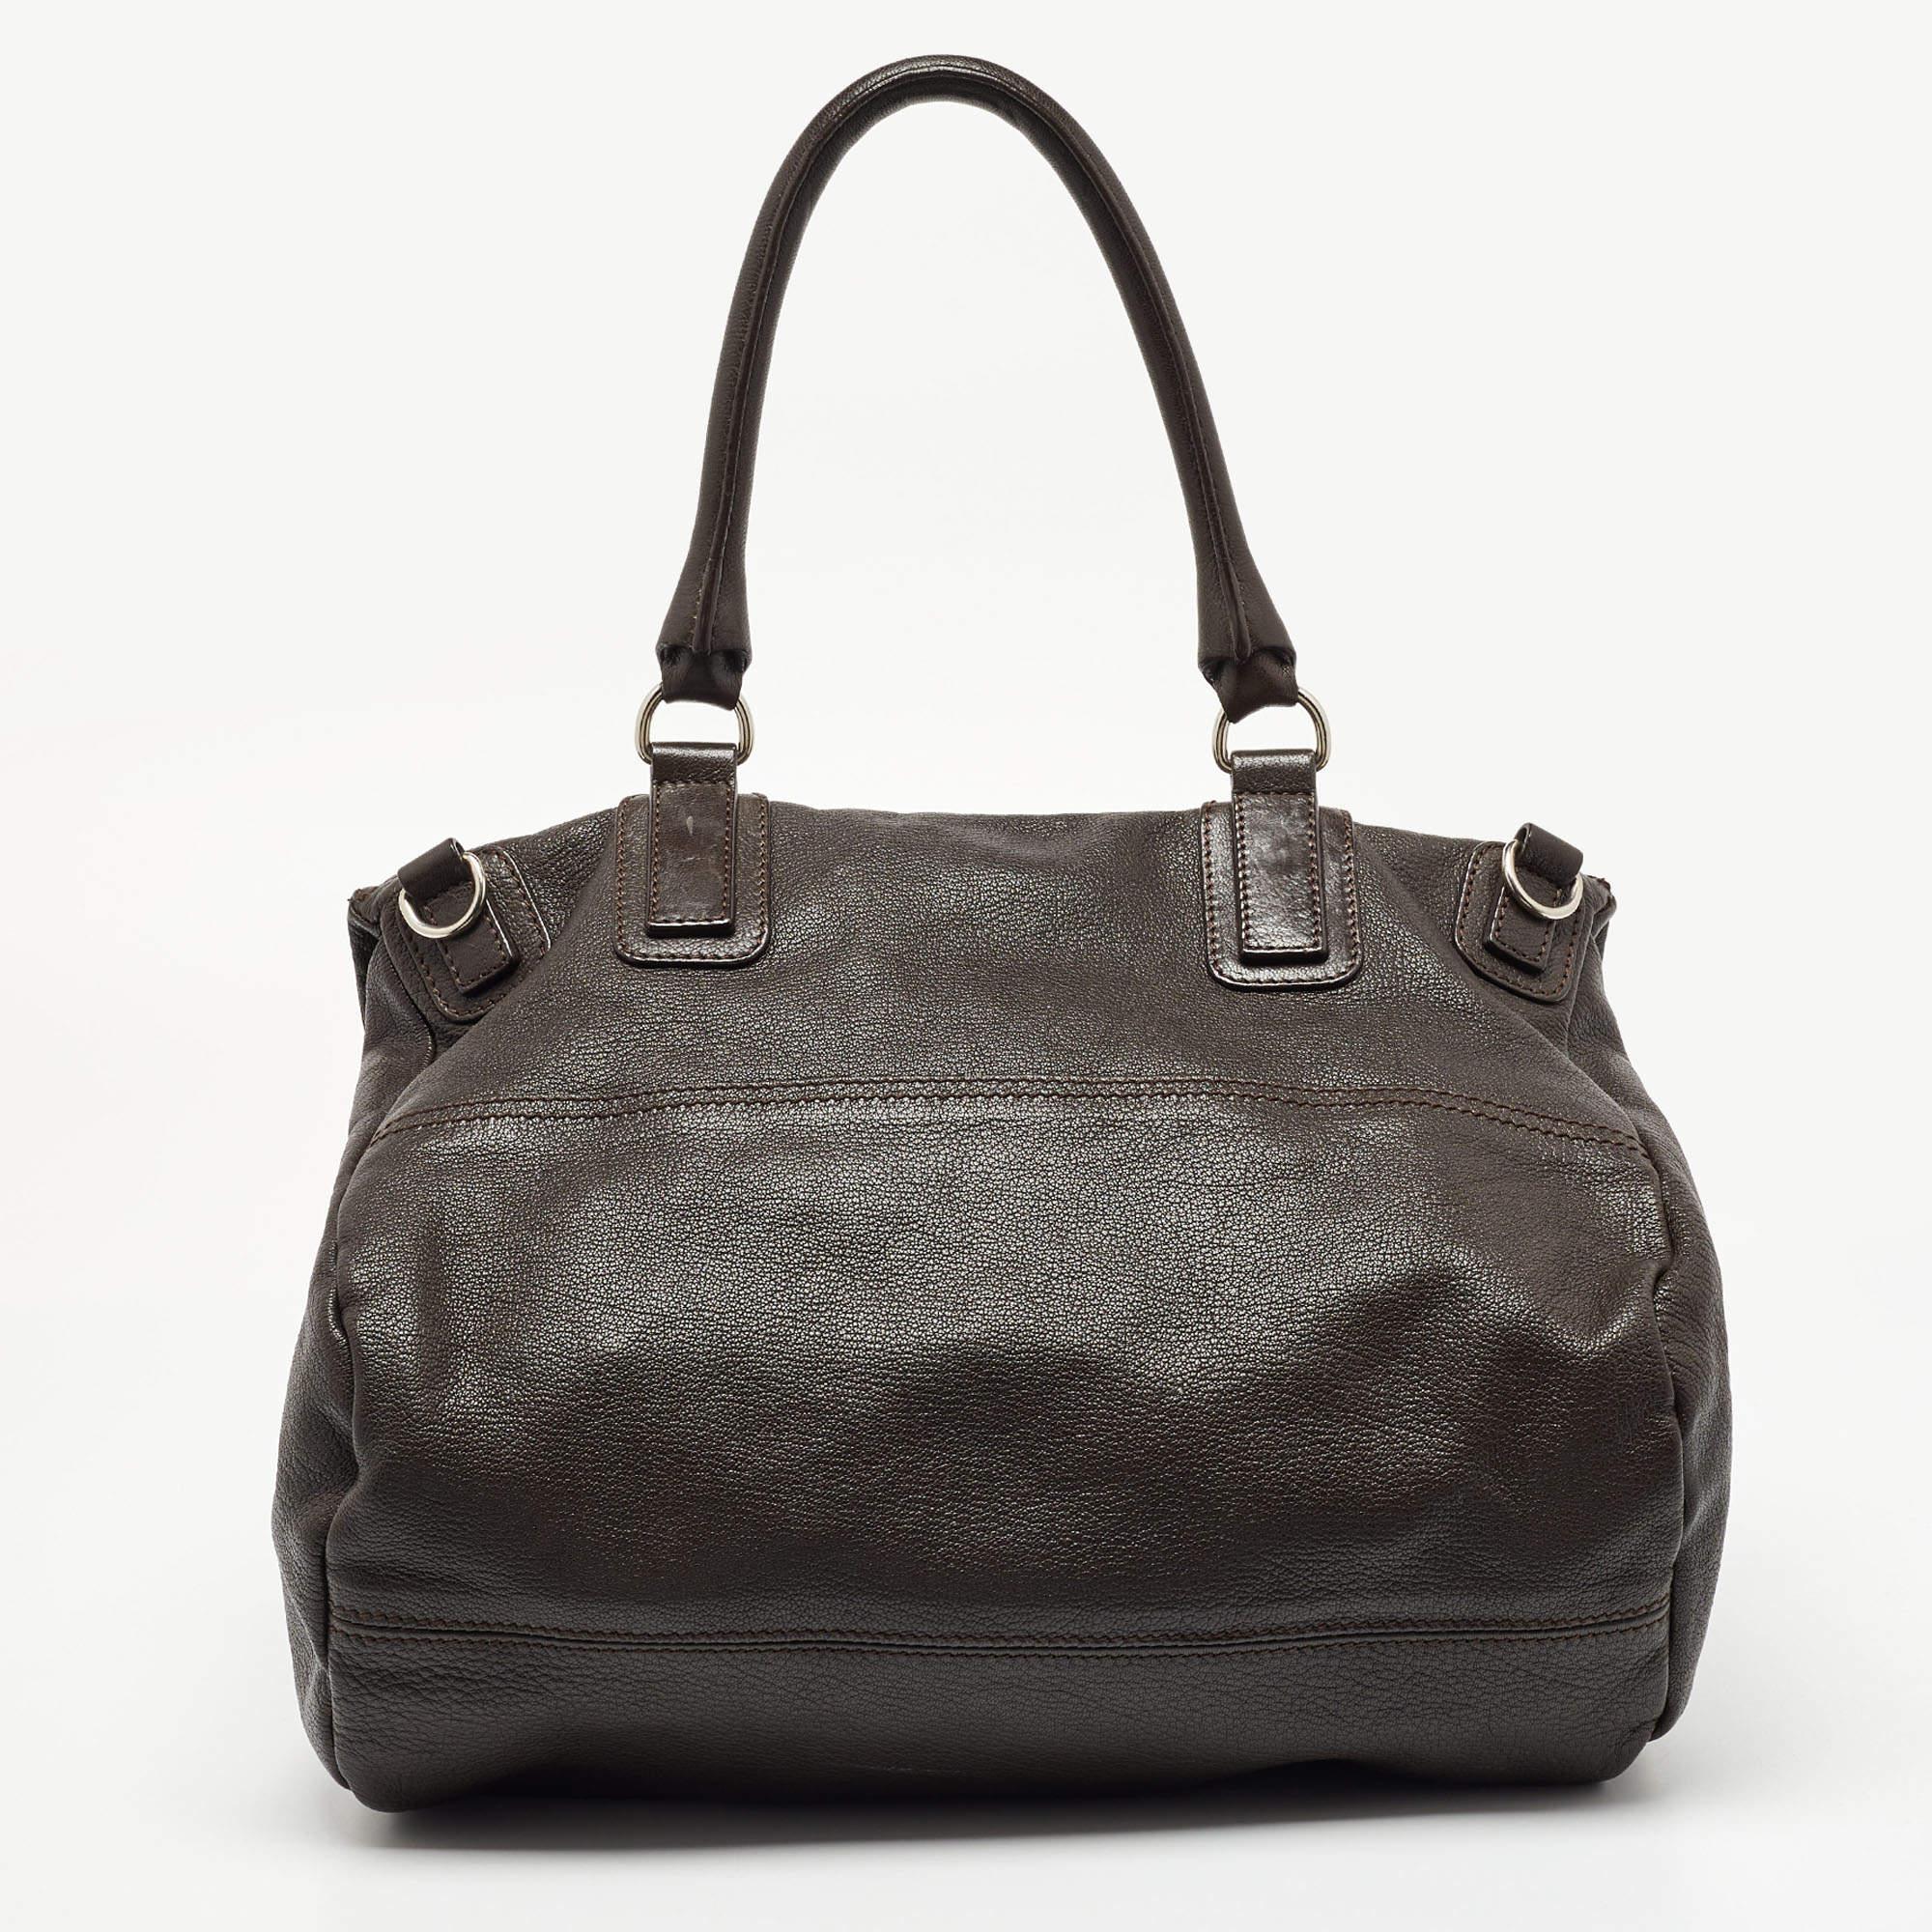 A timeless creation, this bag perfectly balances simplicity with sophistication. It is created from high-quality materials with a top handle to carry it around effortlessly. The perfectly sized interior of this creation will luxuriously house your